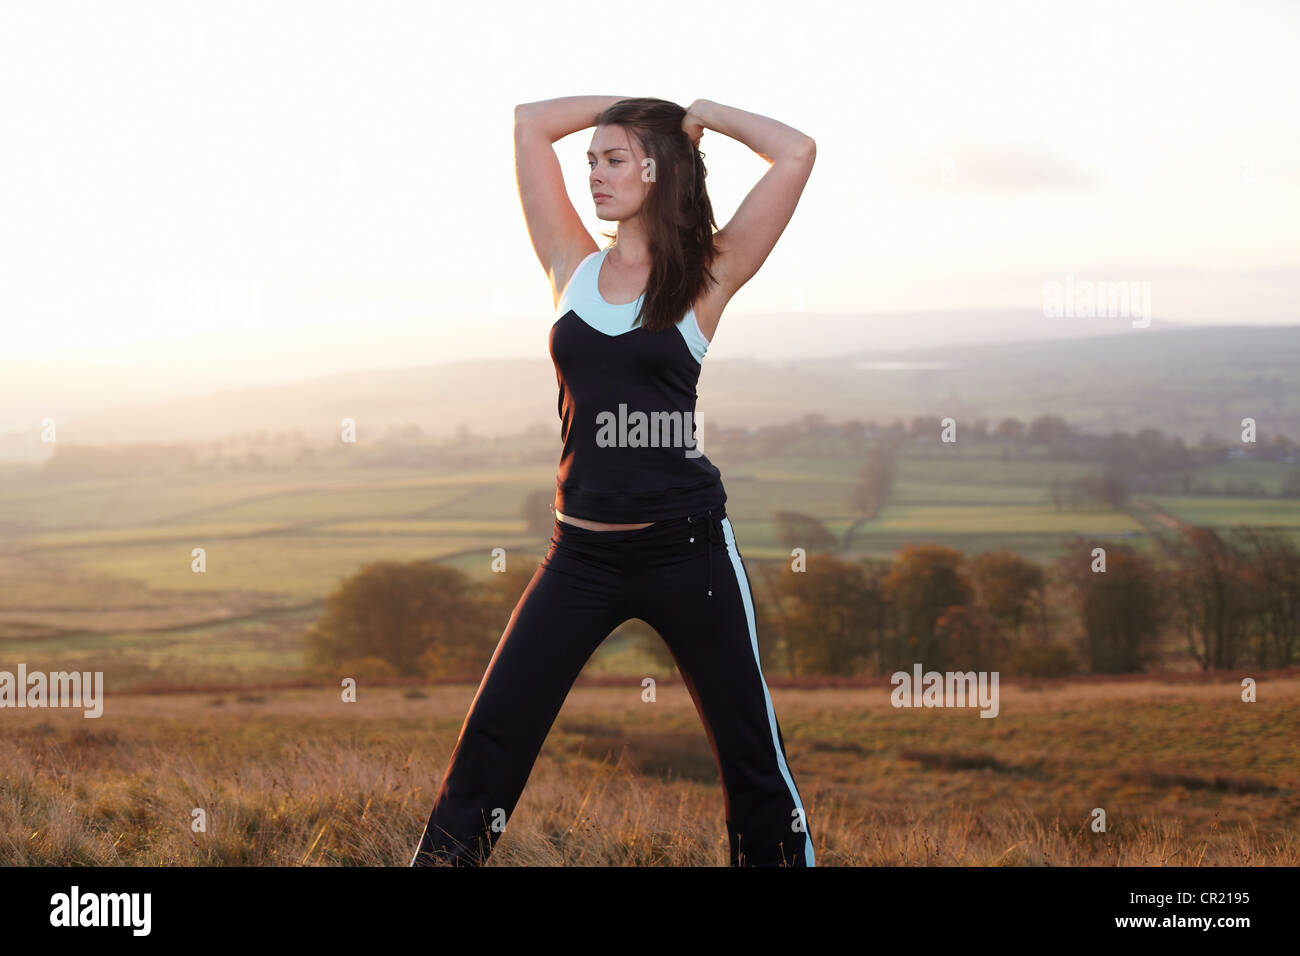 Runner stretching in rural landscape Stock Photo